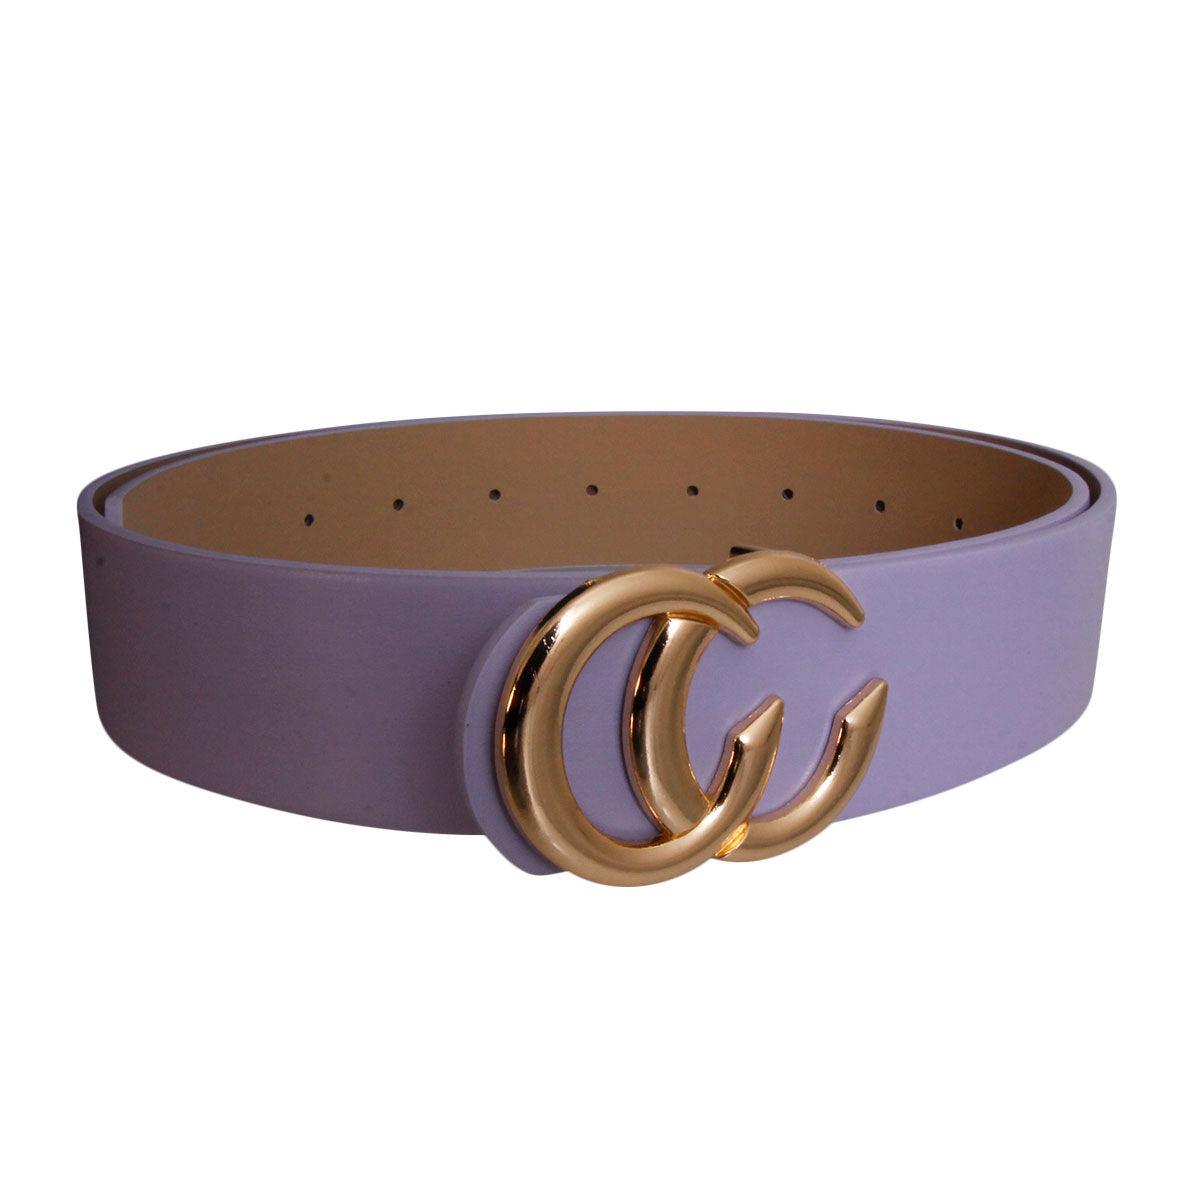 Belt for Women in Lavender and Gold Accent